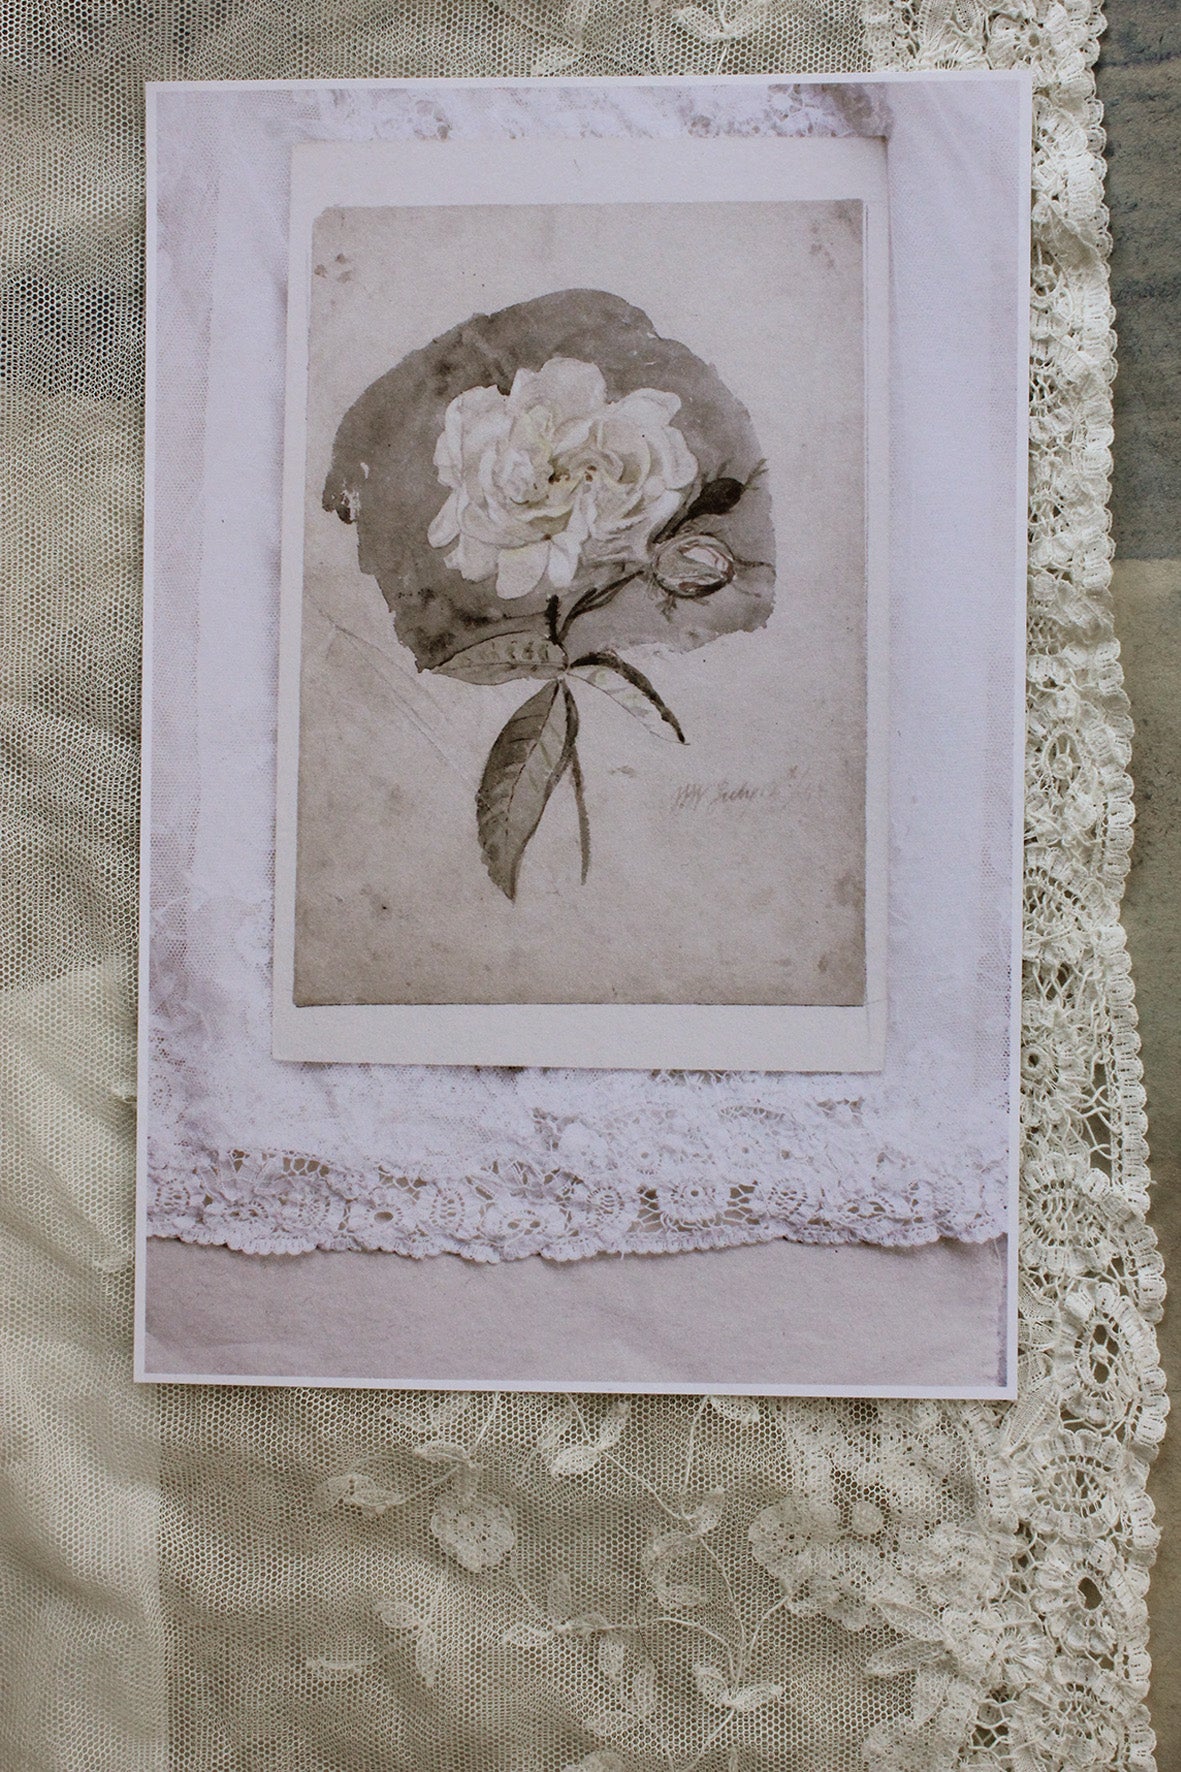 Pin Board Prints from The Linen Garden Studio ~ "Lace & Grey" collection